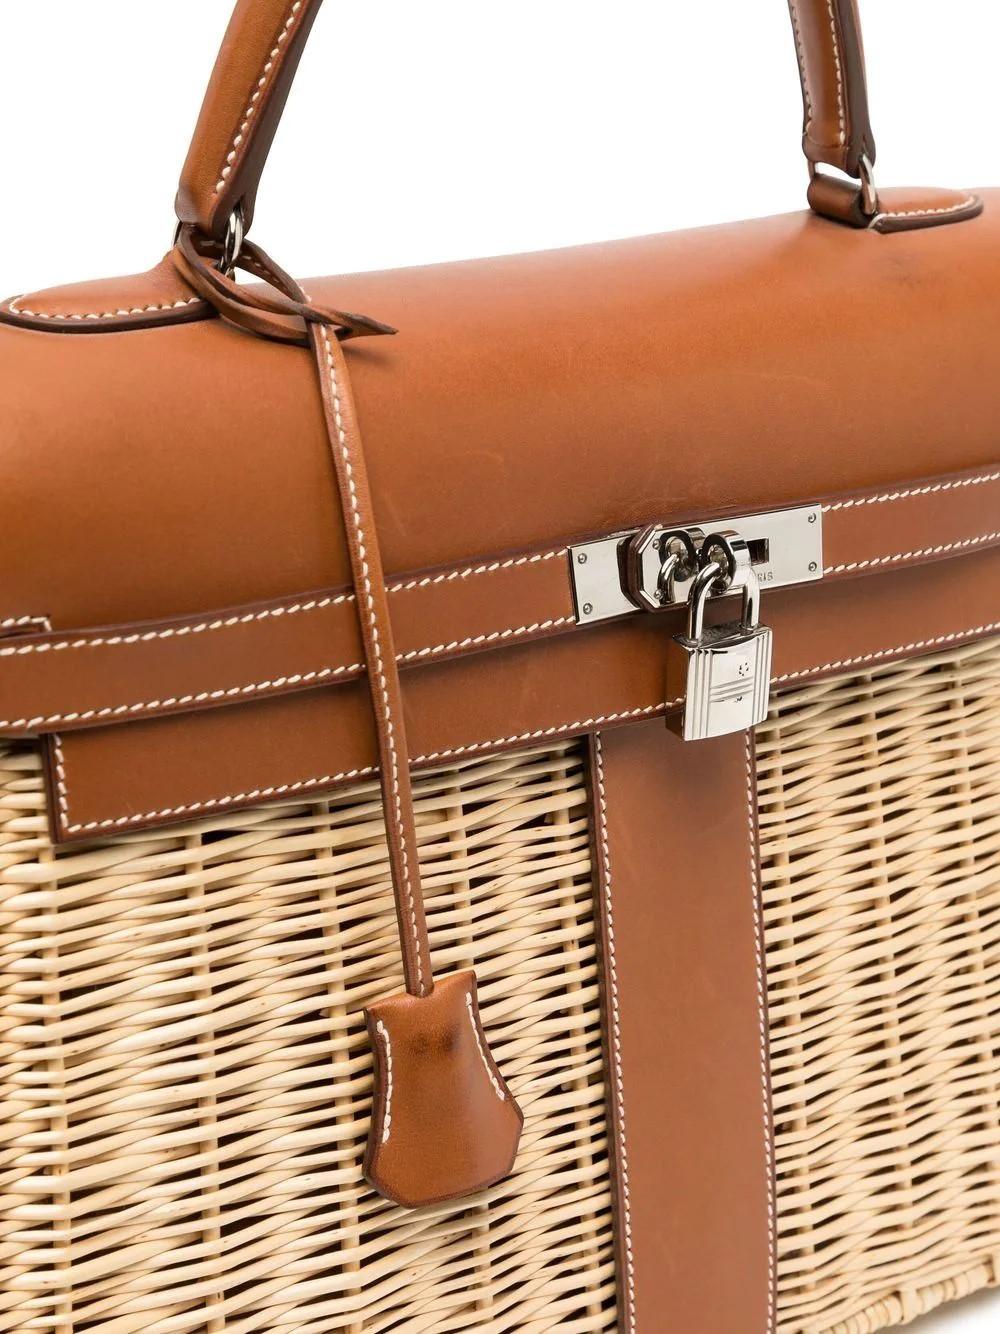 Limited Edition Hermes Picnic Kelly 35 For Sale 1